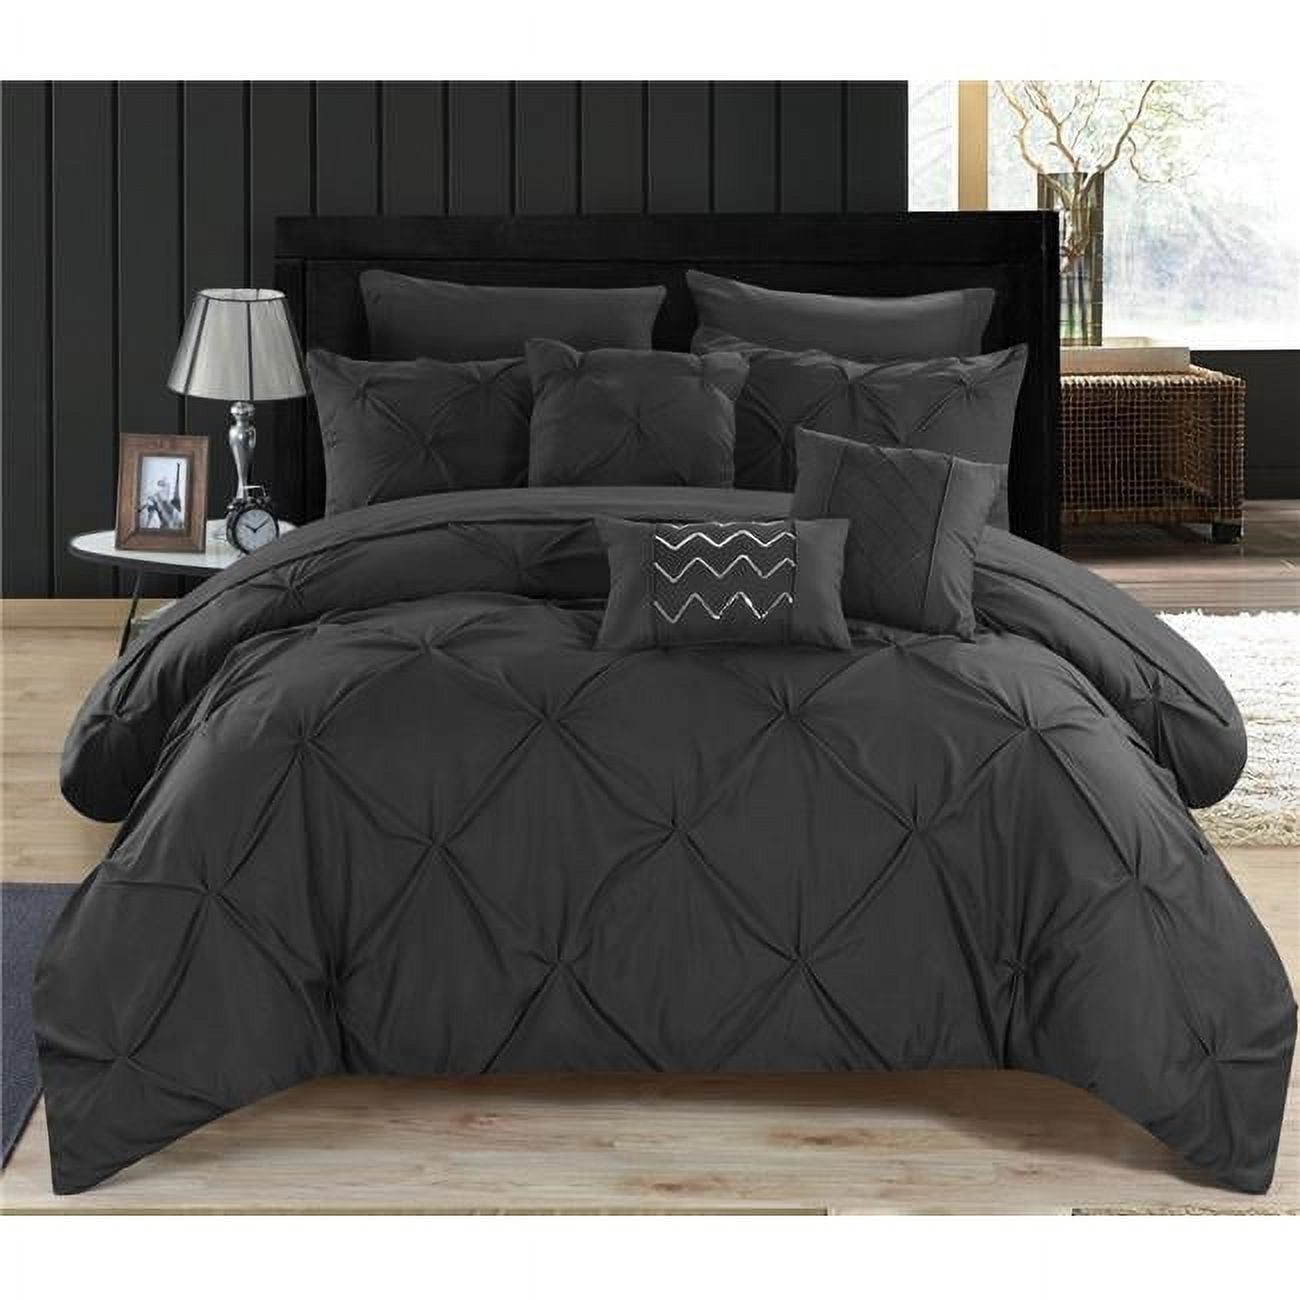 Cs3396-us 8 Piece Zita Pinch Pleated, Ruffled & Pleated Complete Twin Bed In A Bag Comforter Set With Black Sheets Set & Deocrative Pillows